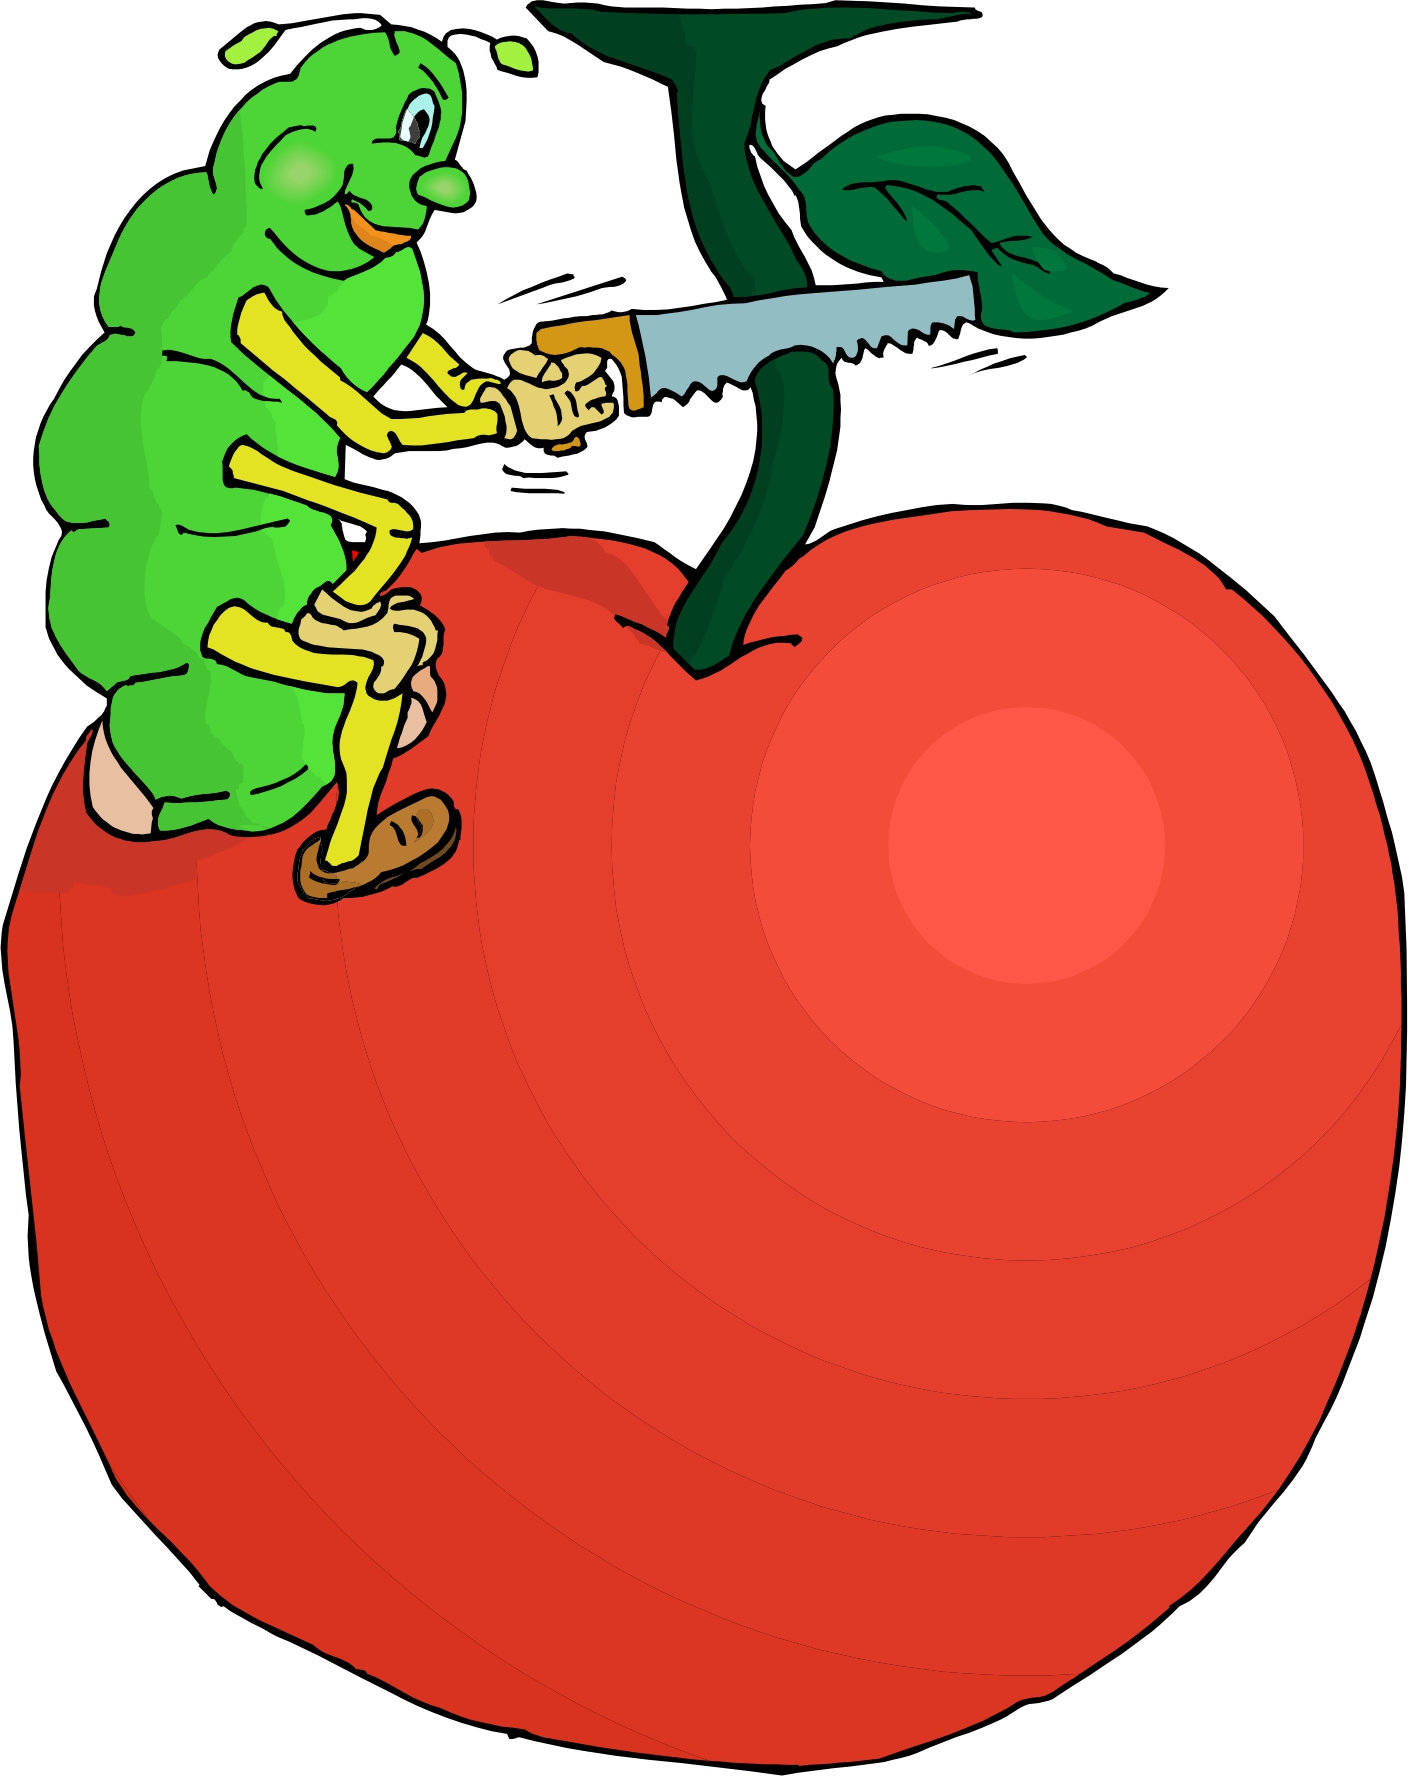 Apple Cartoon Pictures | Free Download Clip Art | Free Clip Art ...